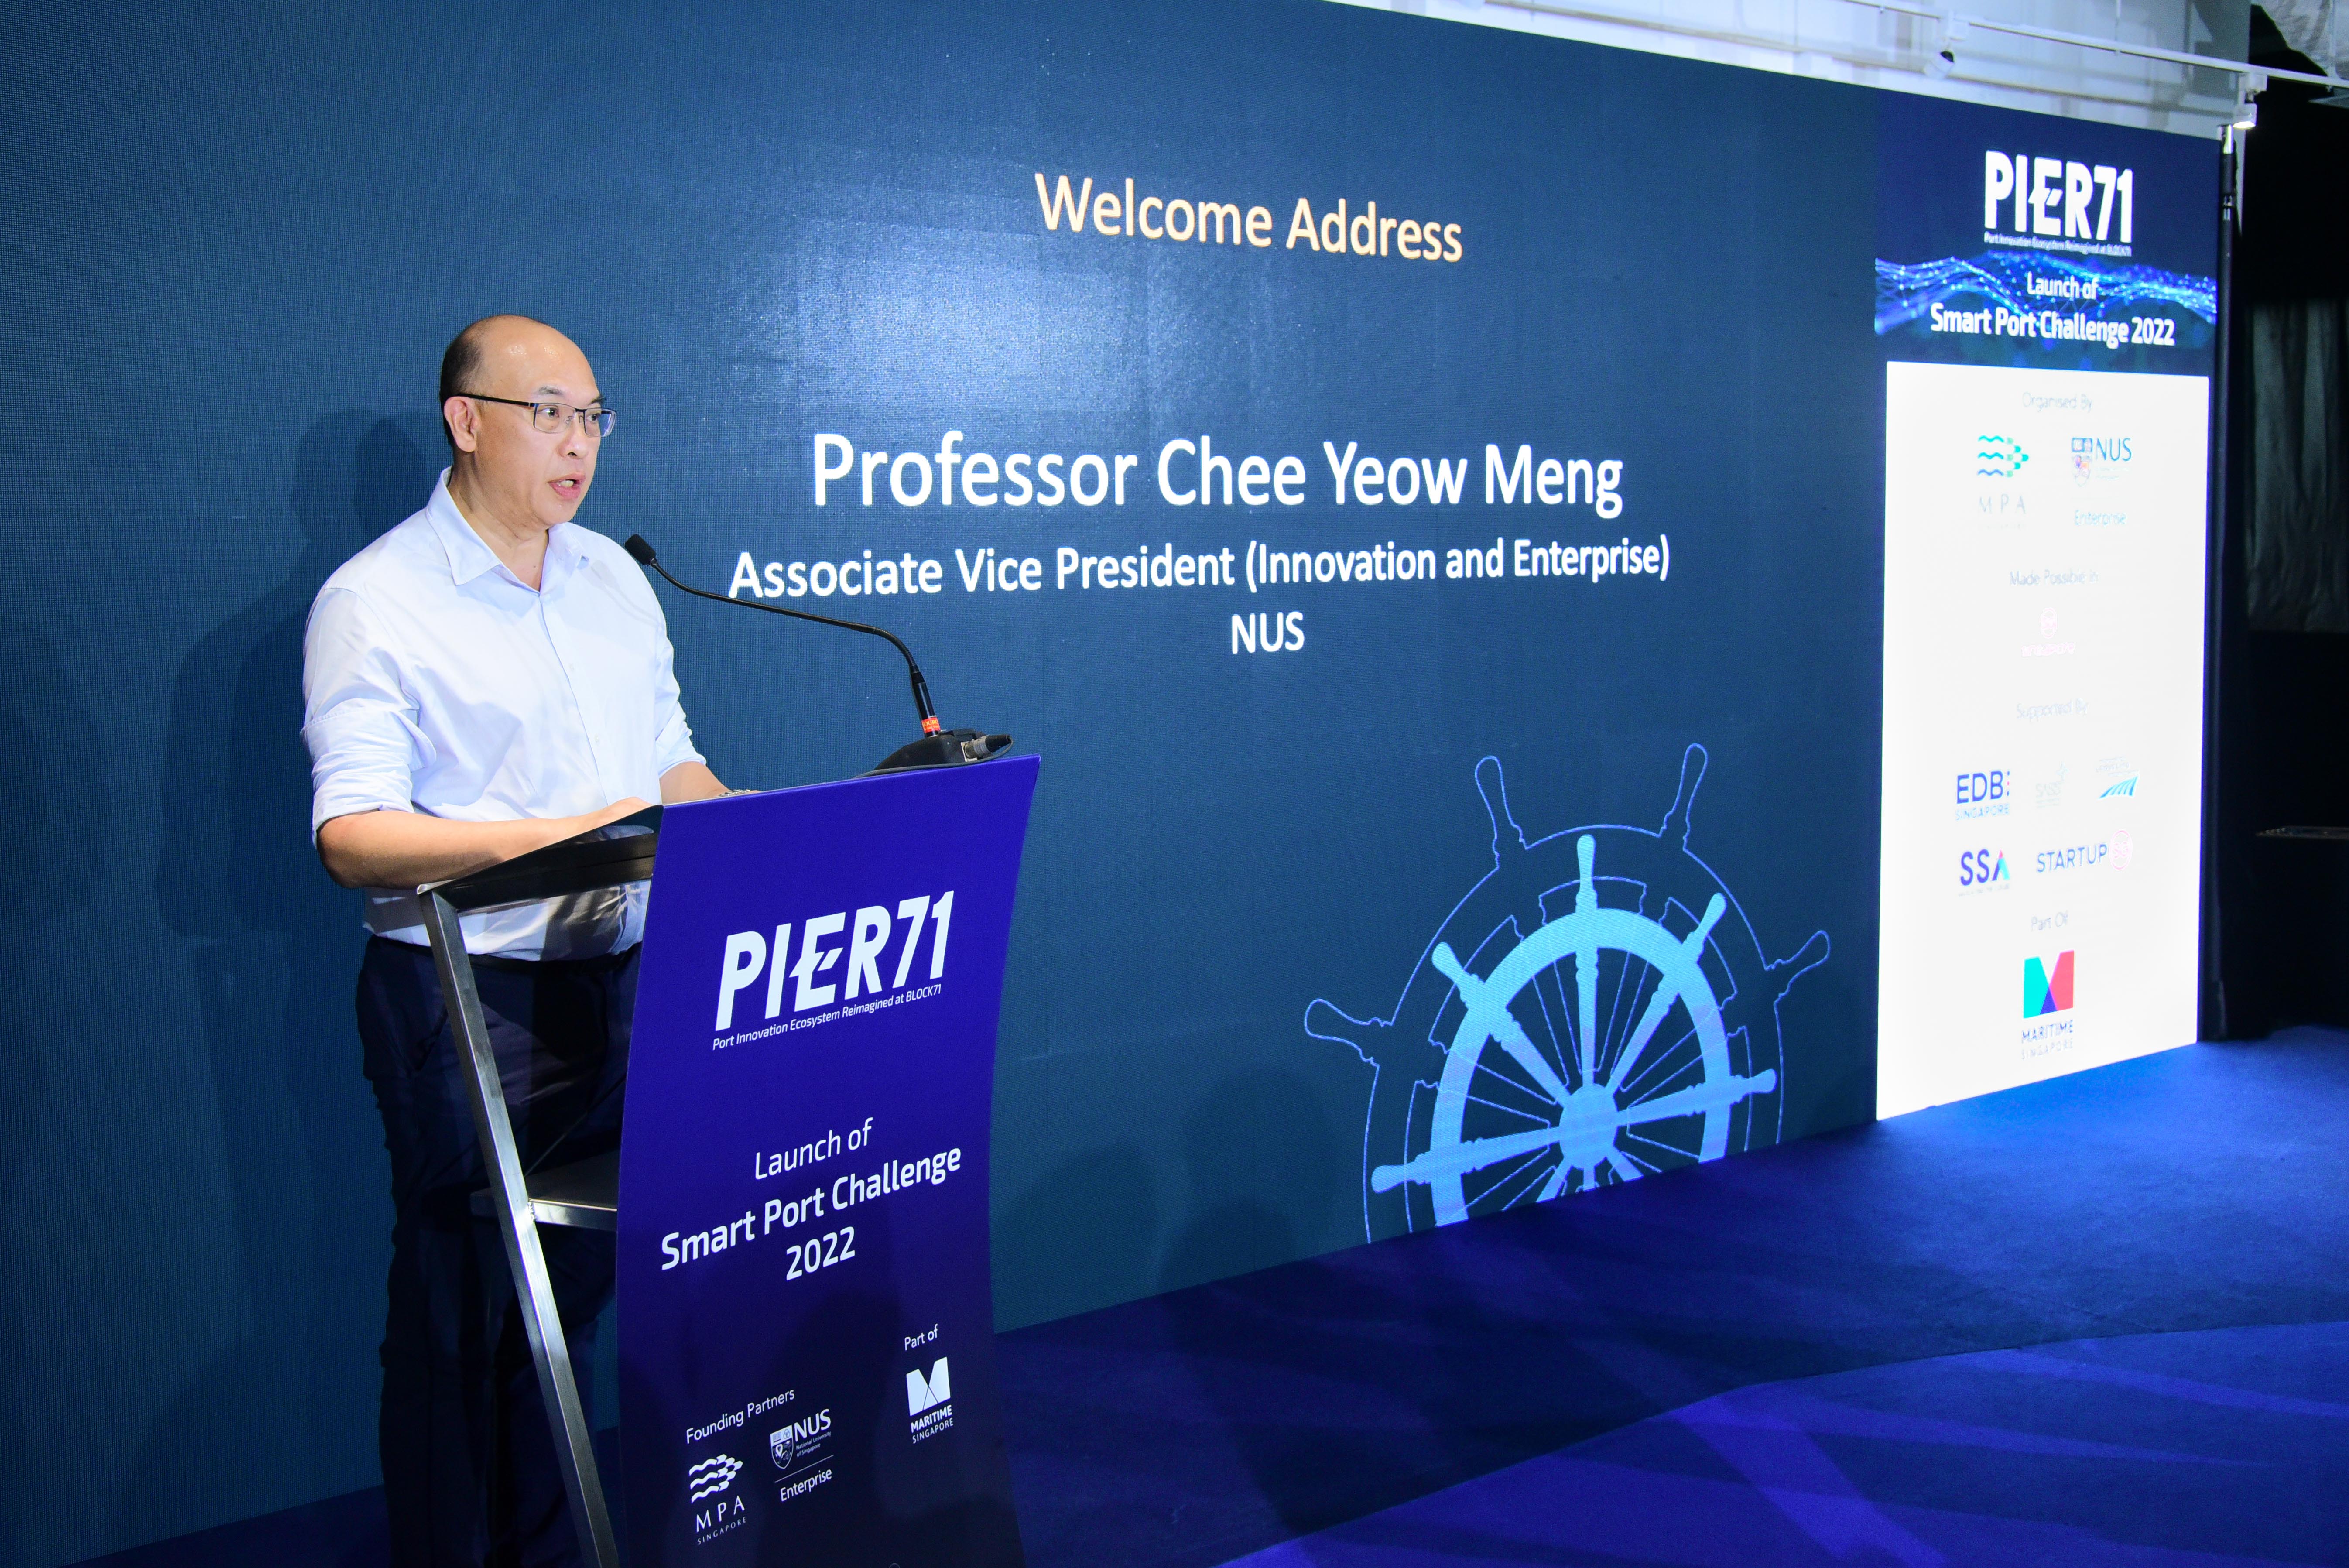 Professeor Chee Yeow Meng delivering his welcome address at the launch of Smart Port Challenge 2022